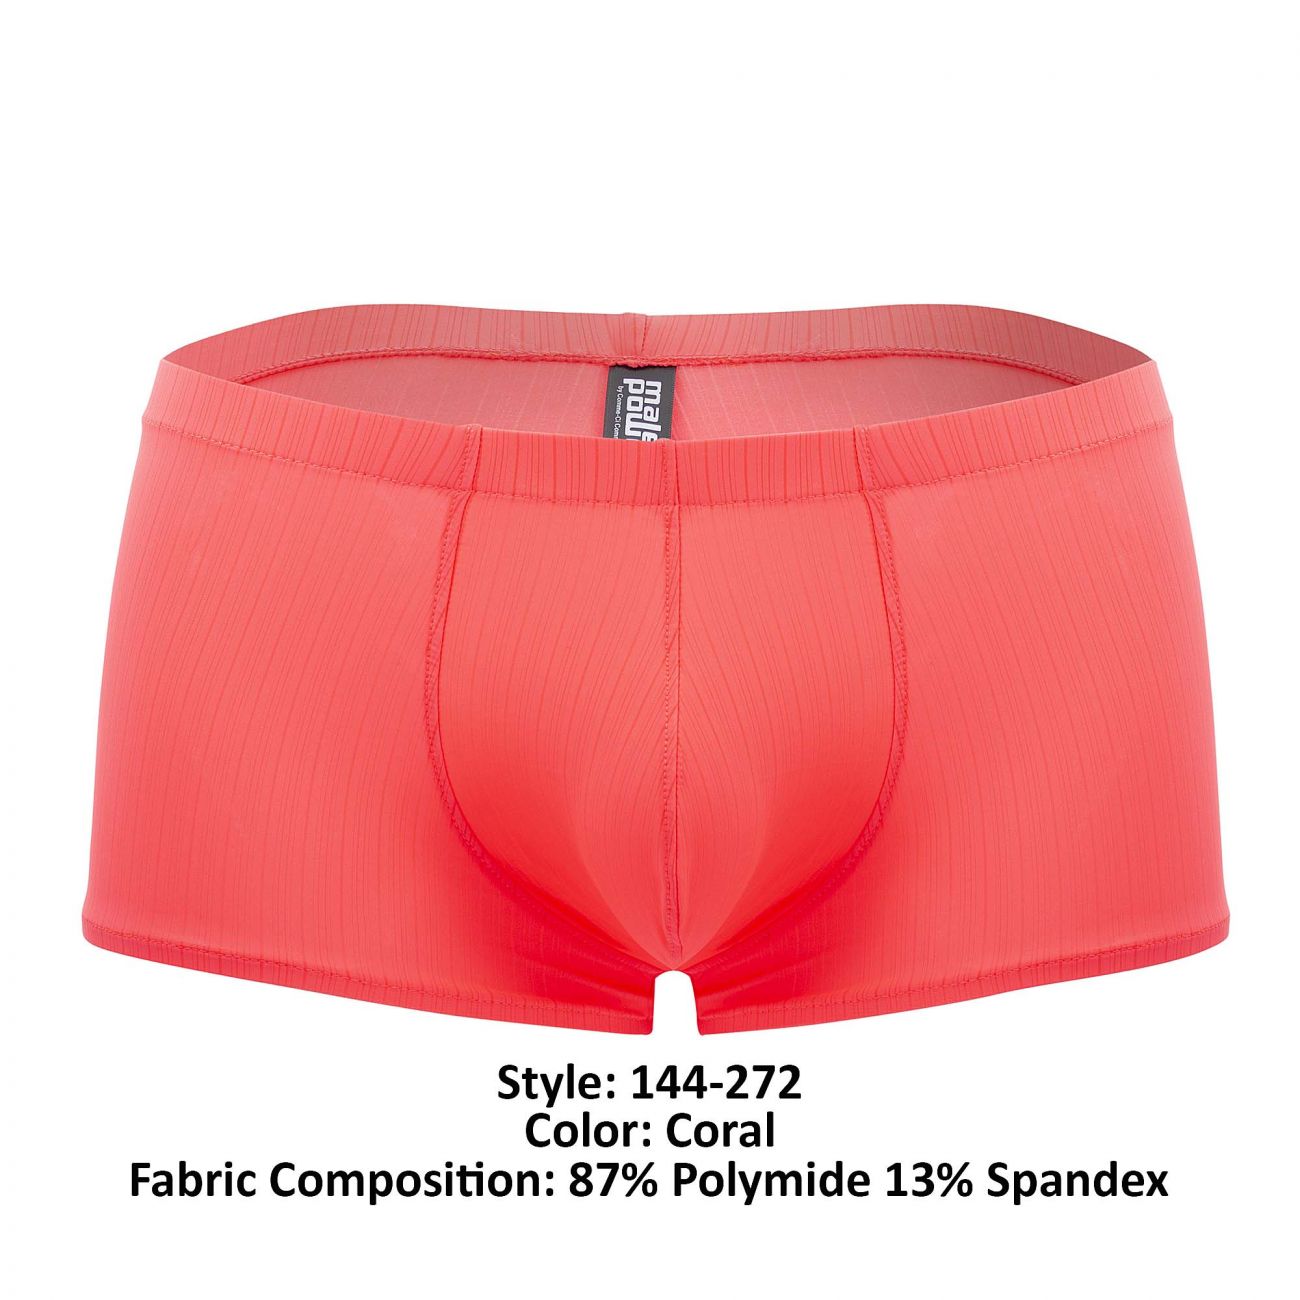 Male Power 144-272 Barely There Mini Short Coral